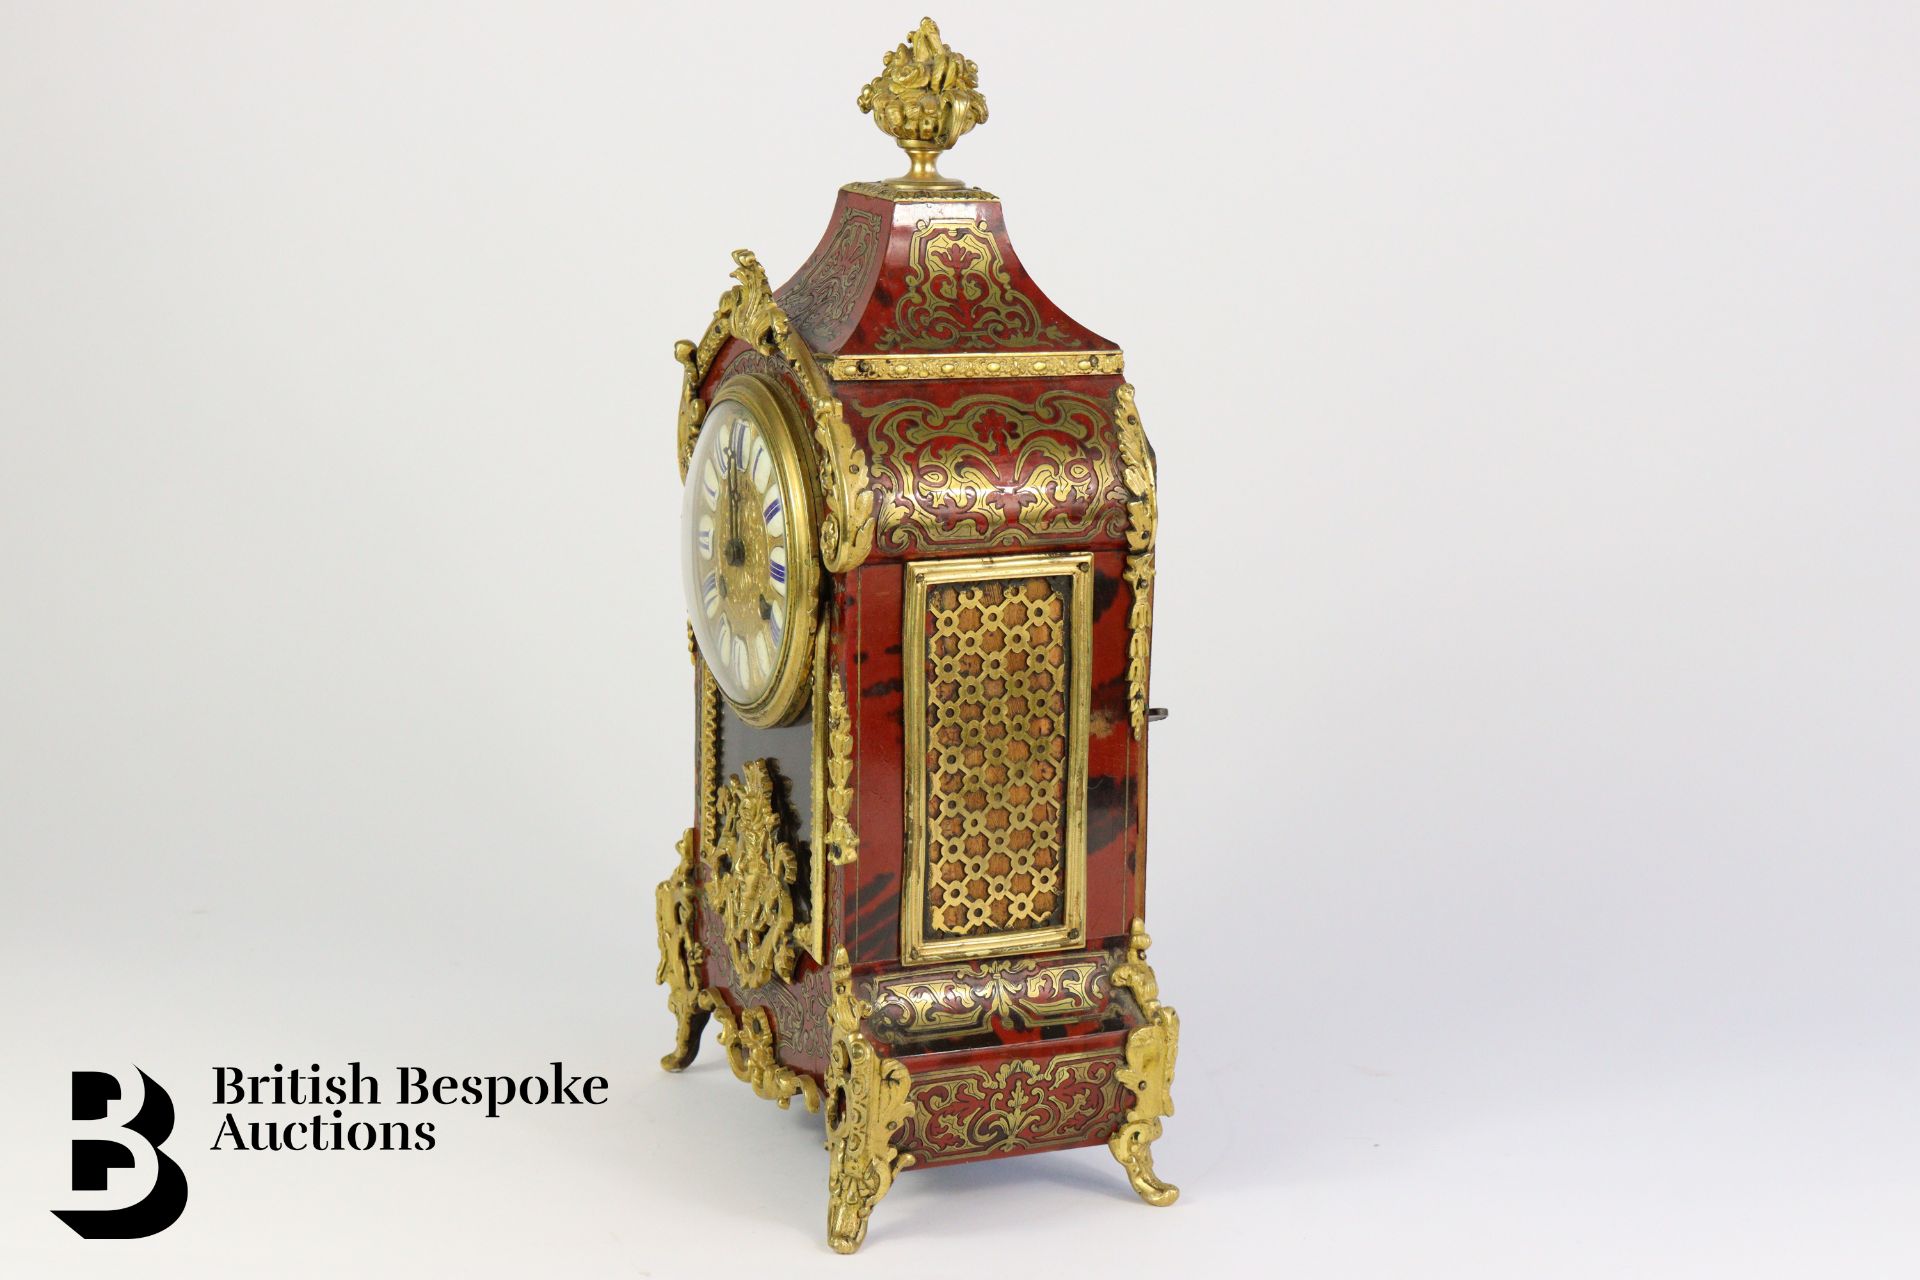 French Boulle Mantel Clock - Image 5 of 9